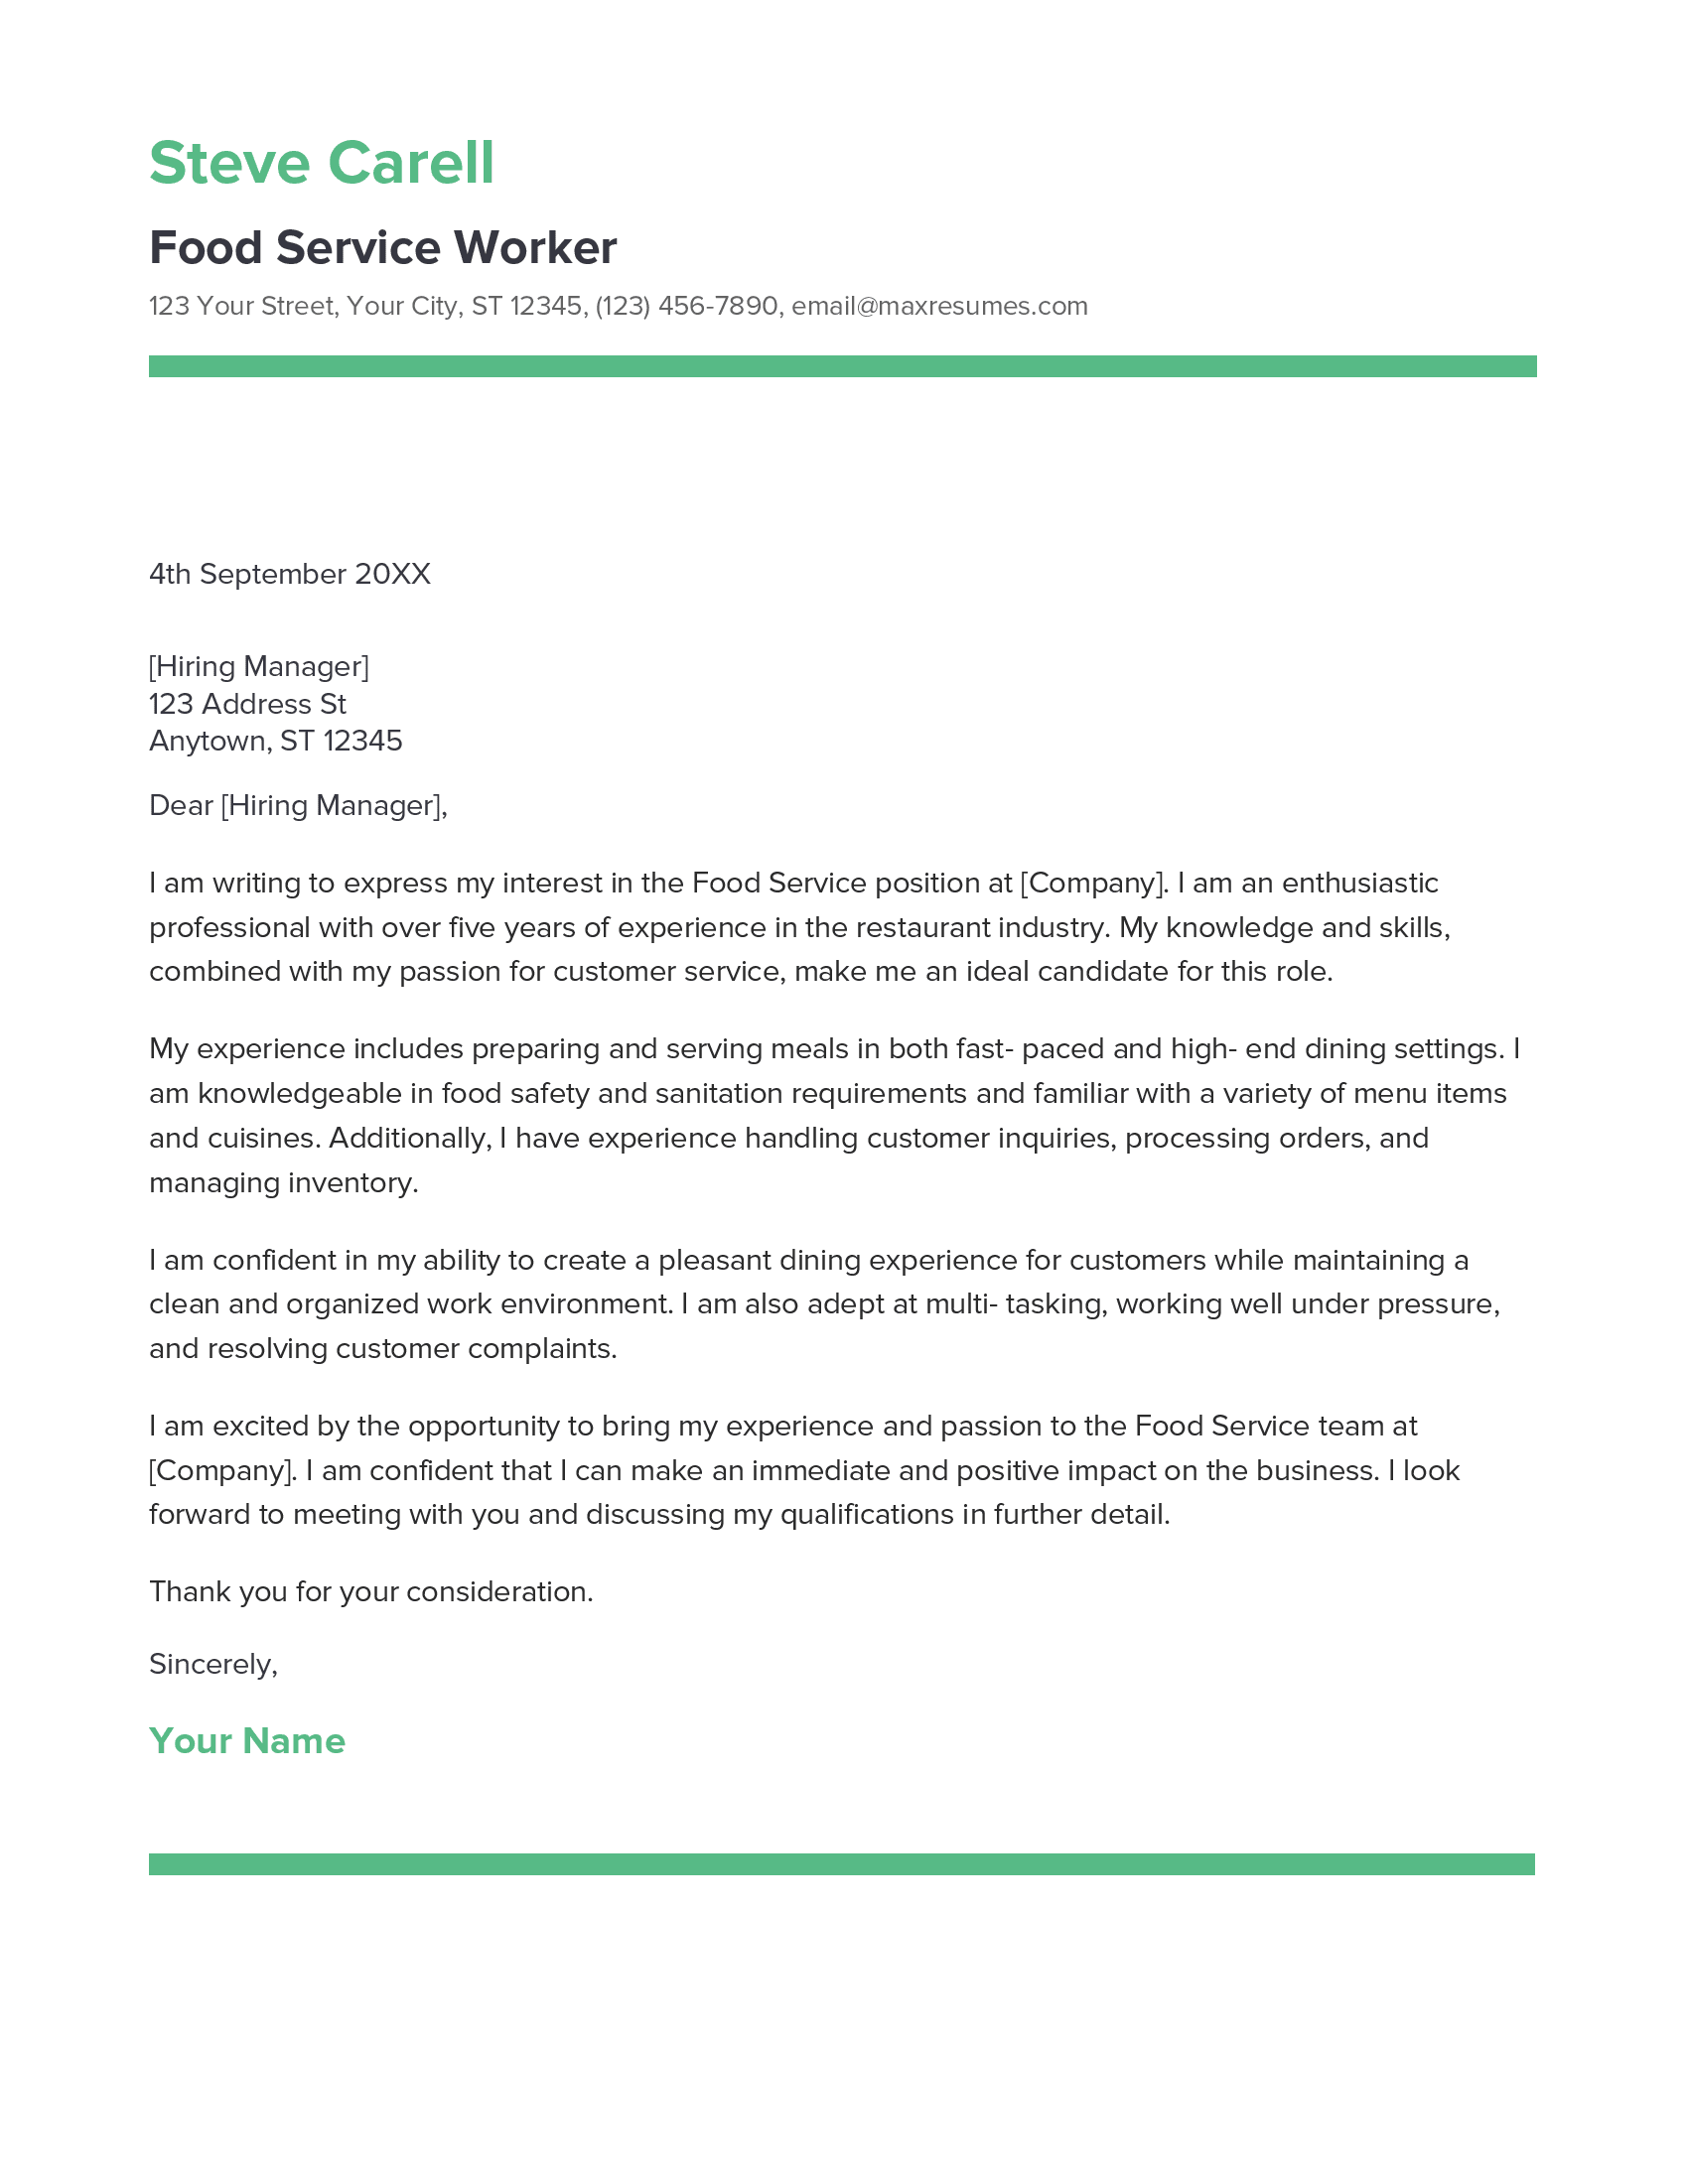 Food Service Worker Cover Letter Example